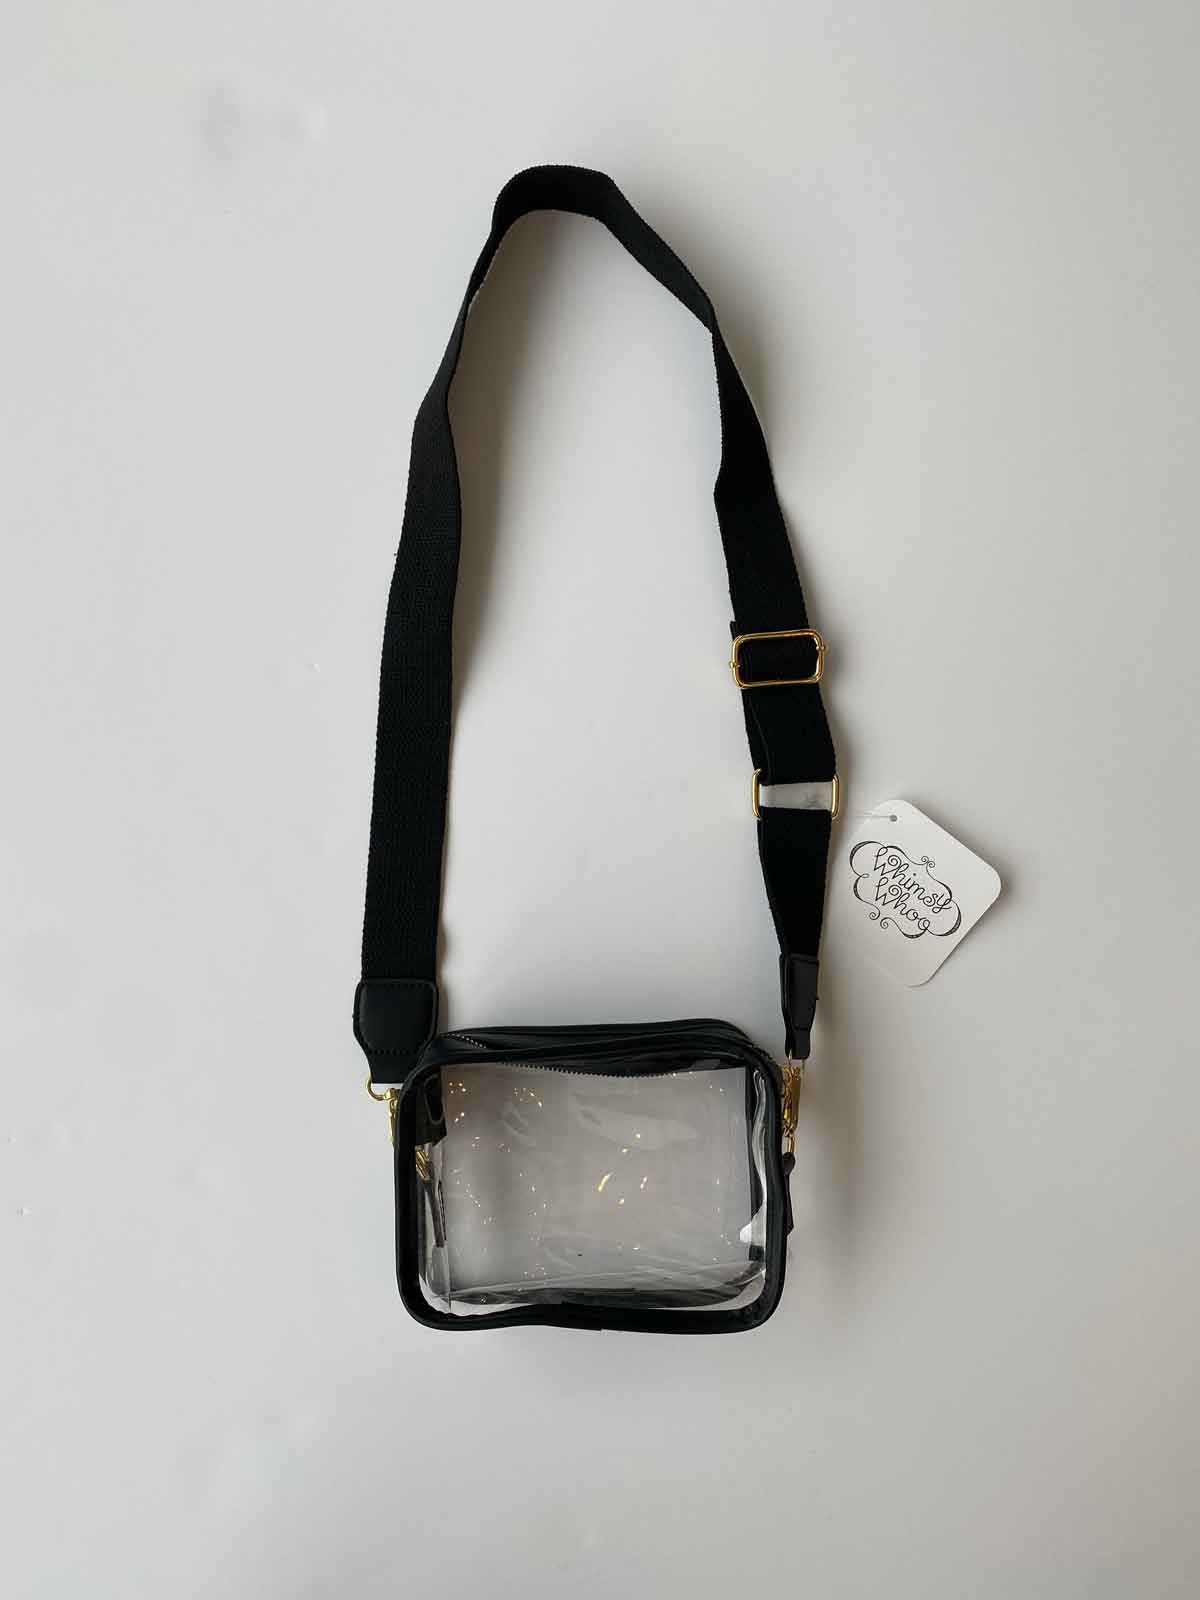 Clear Cross Body Bags with a black strap. Stadium approved, Concert Approved